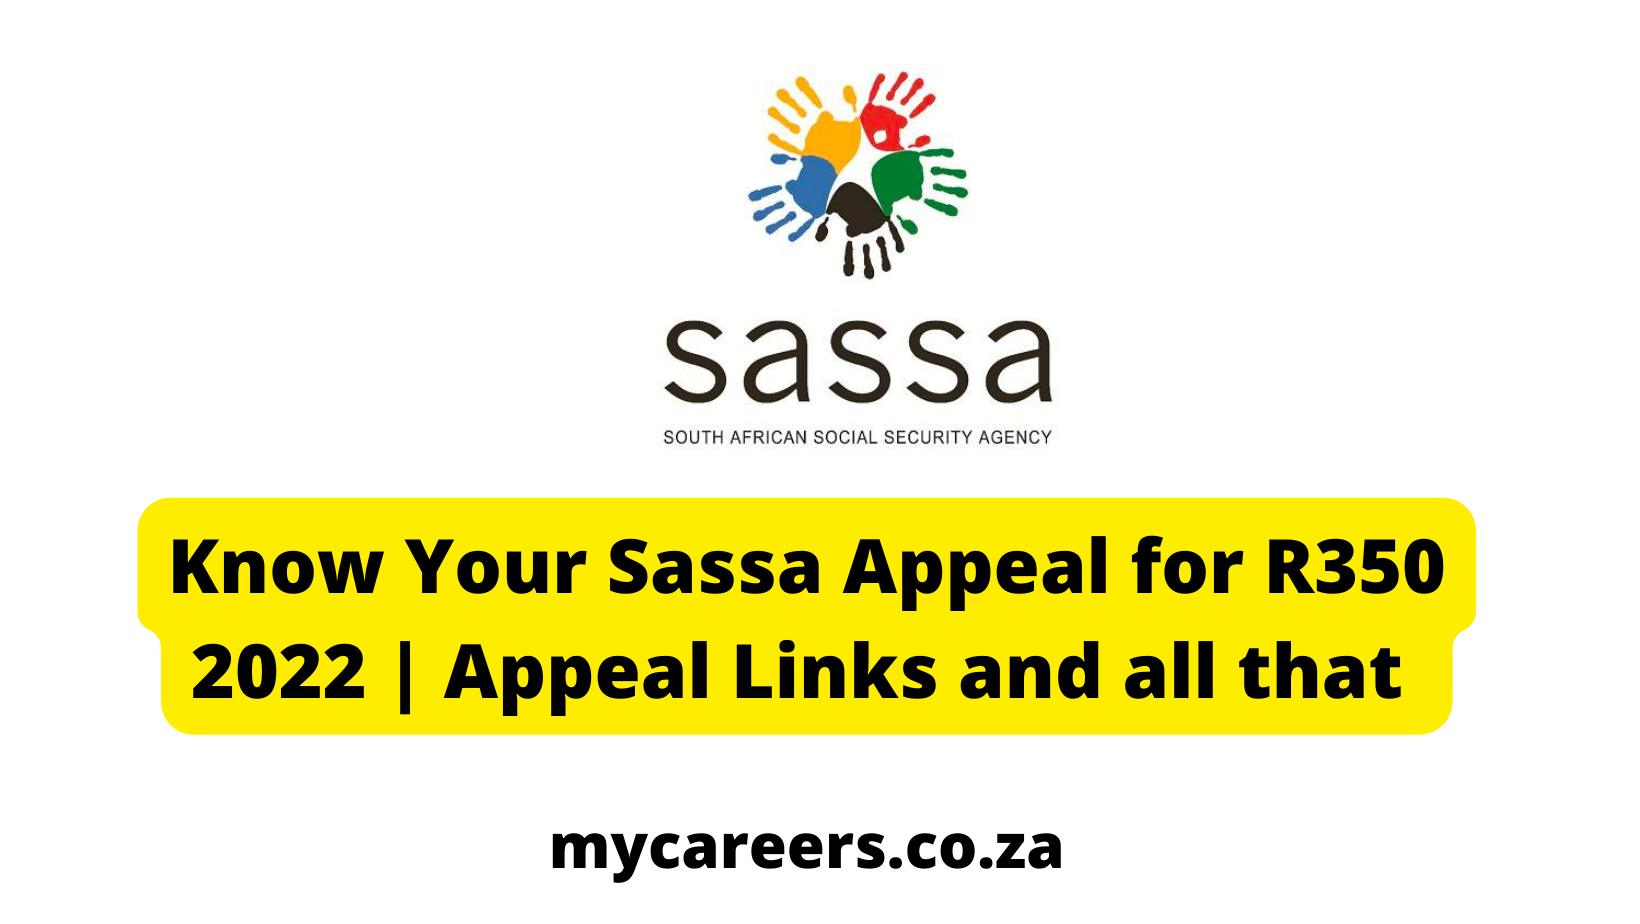 Know Your Sassa Appeal for R350 2022 | Appeal Links and all that